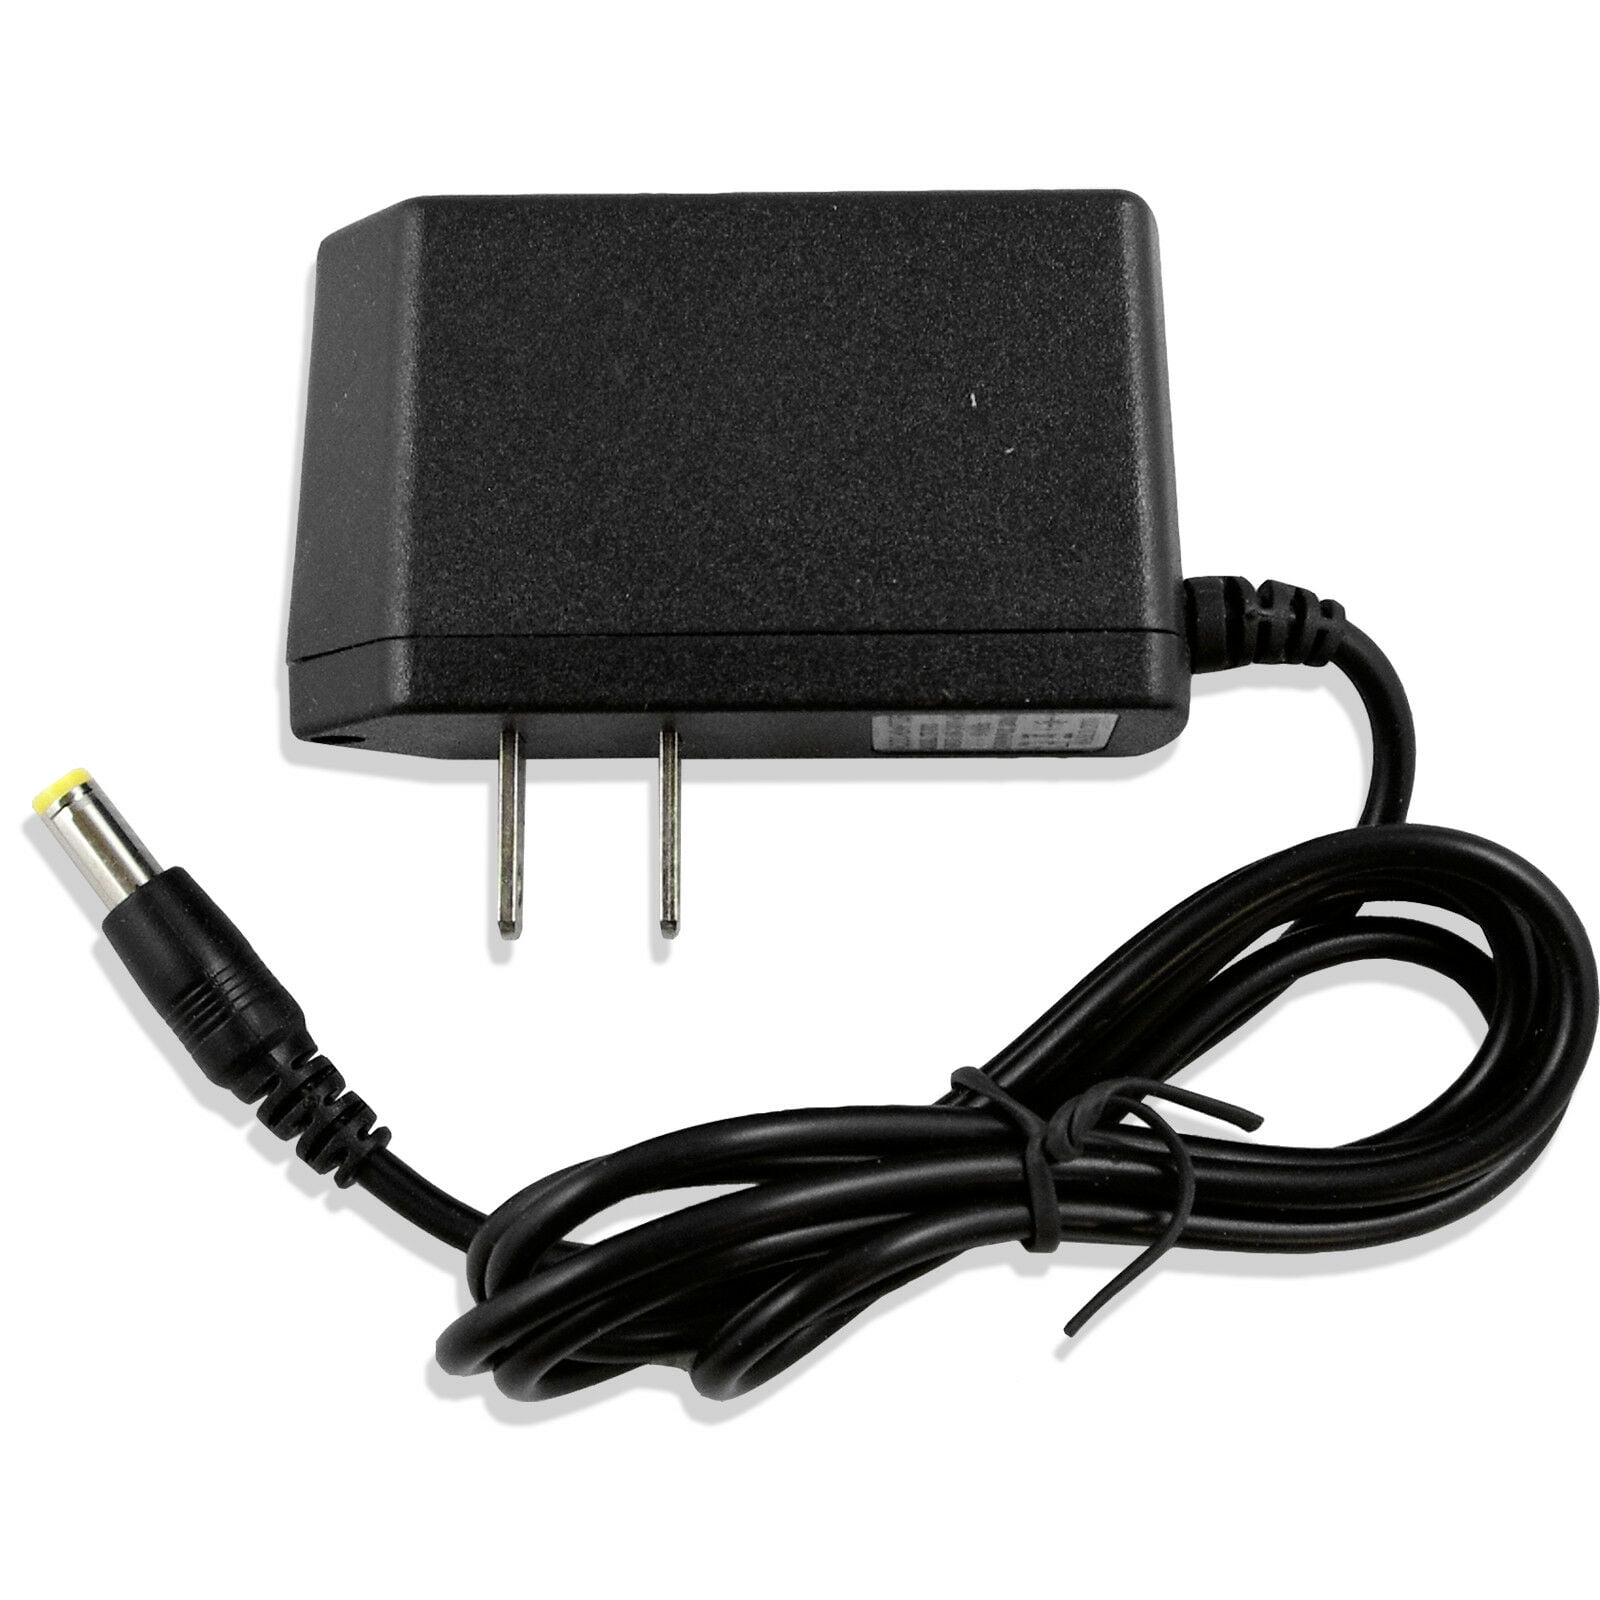 AC Power Adapter Charger For Casio CTK-601 CT-670 CT-655 CTK-120 Keyboard 